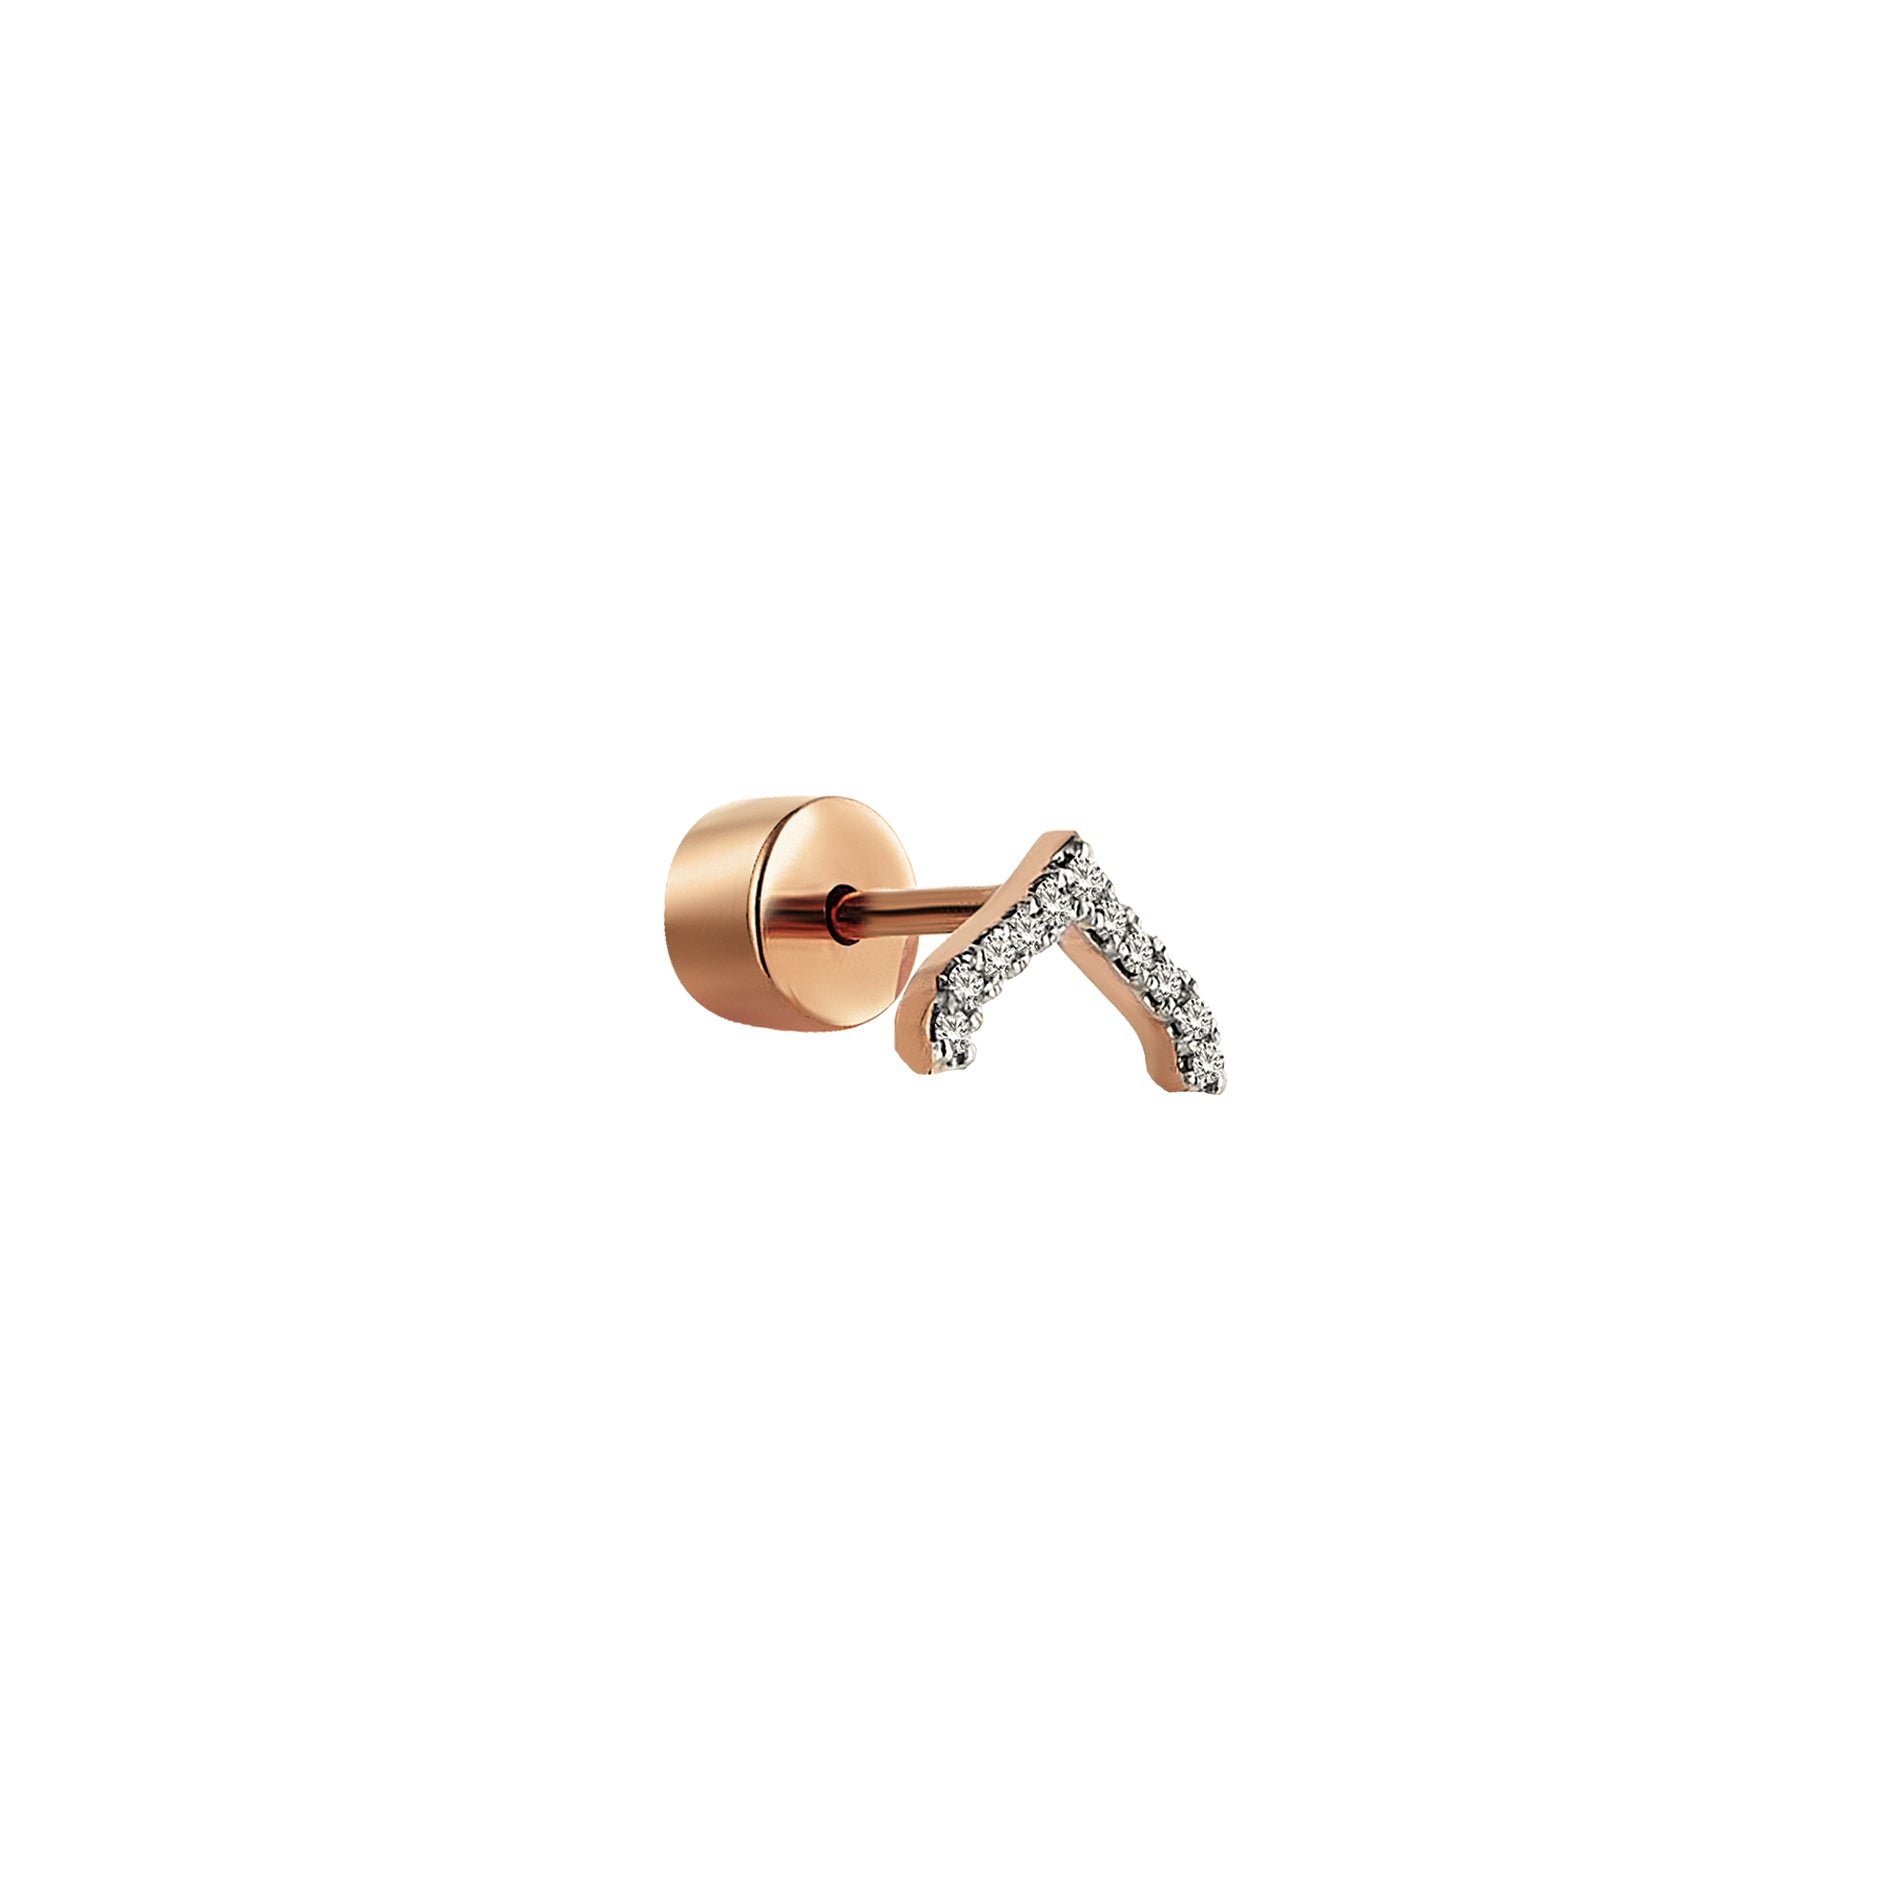 Four Centered Arch Earring in Rose Gold - Her Story Shop